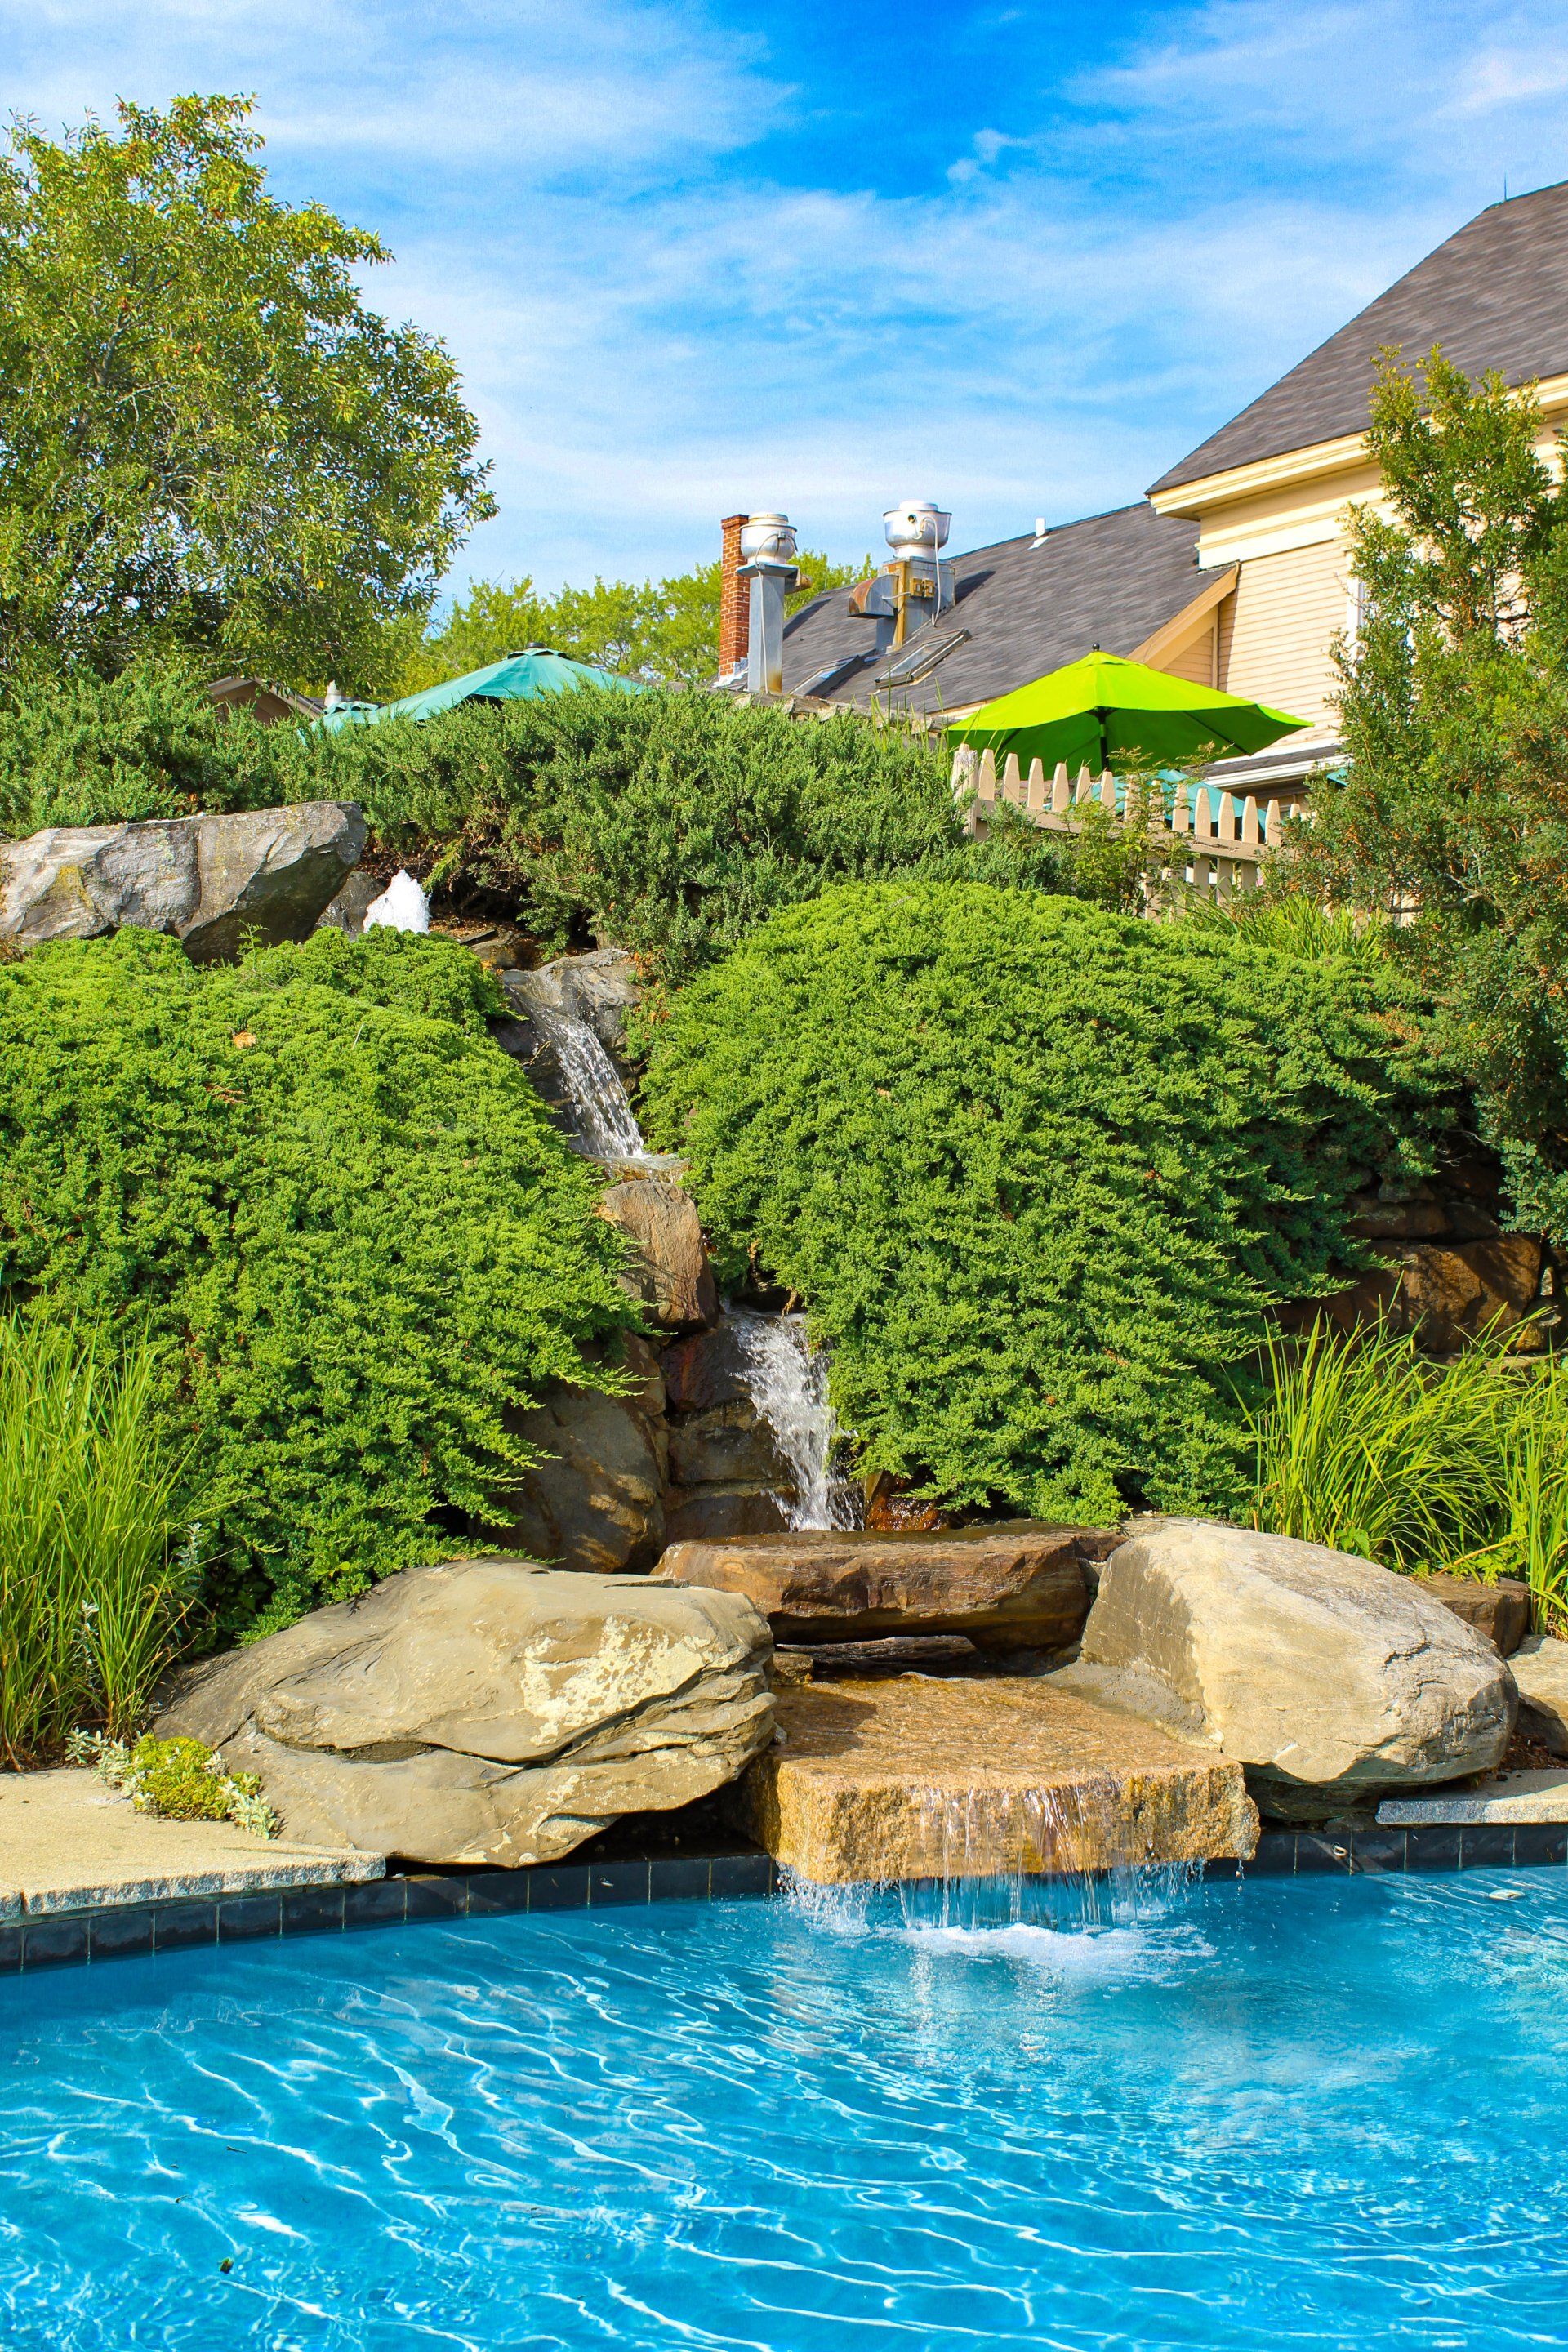 A waterfall with greenery around it, flowing into the pool